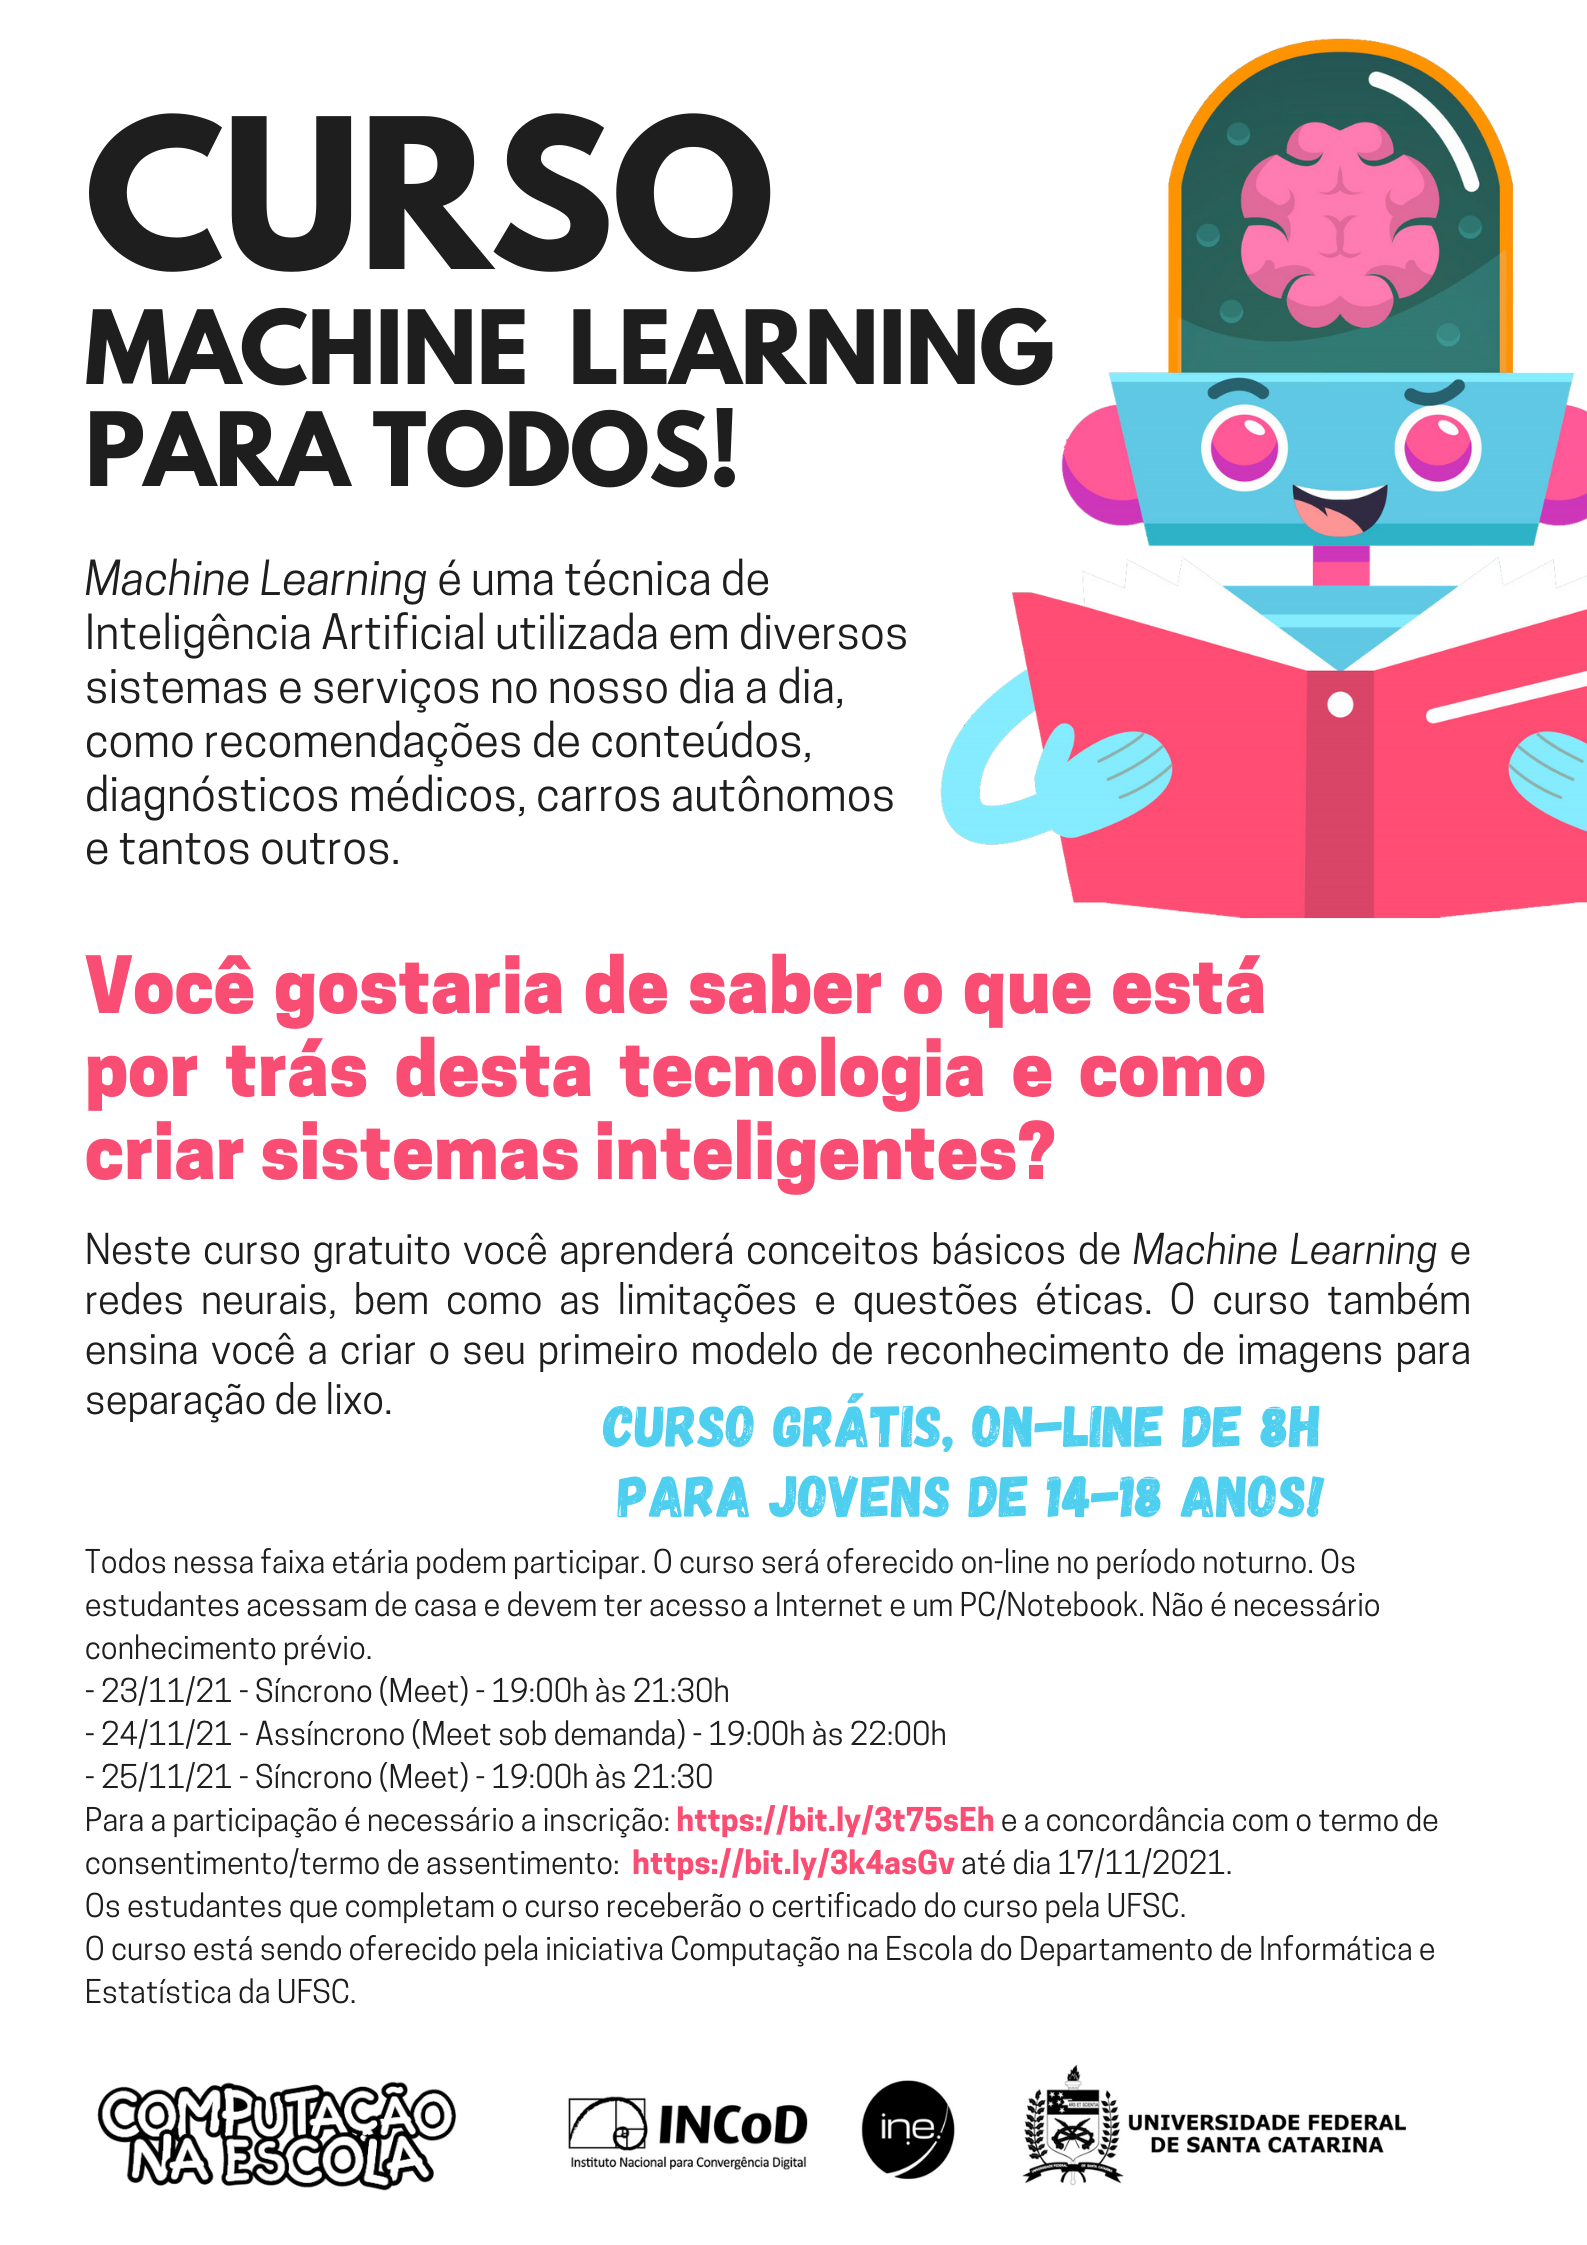 Curso-Machine-Learning-para-Todos-UFSC.png